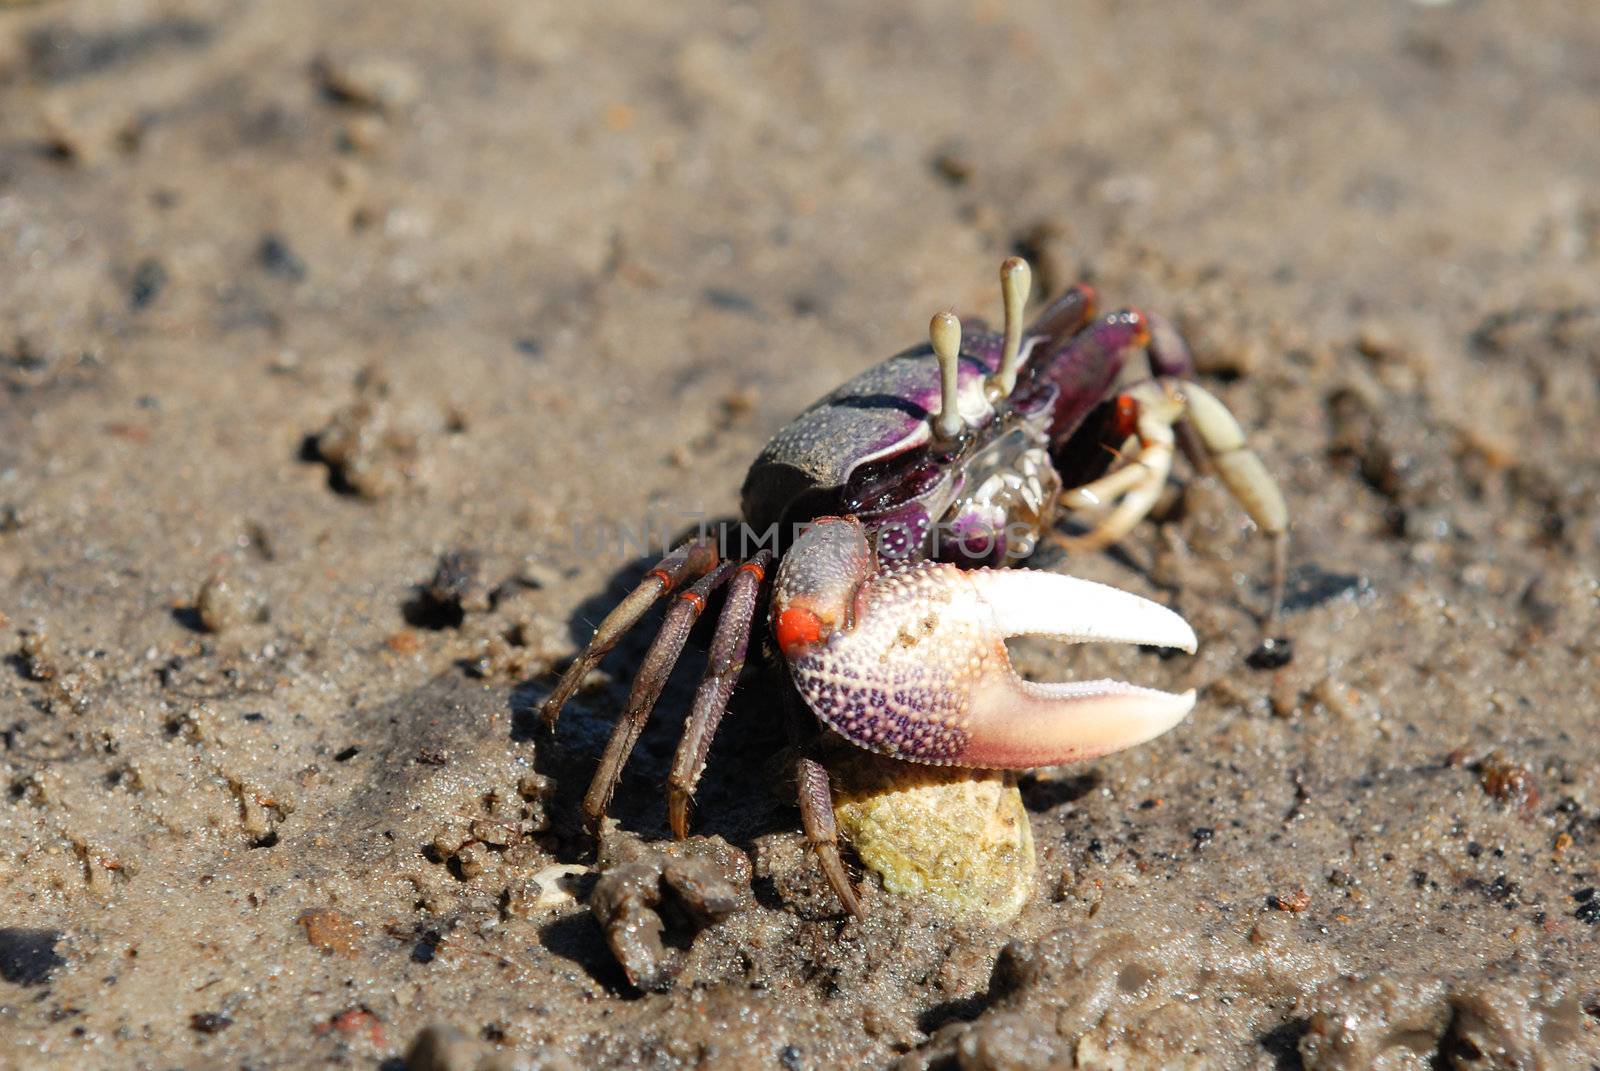 Ghost crab (Ocypode sp.) on the beach, Mozambique, southern Africa